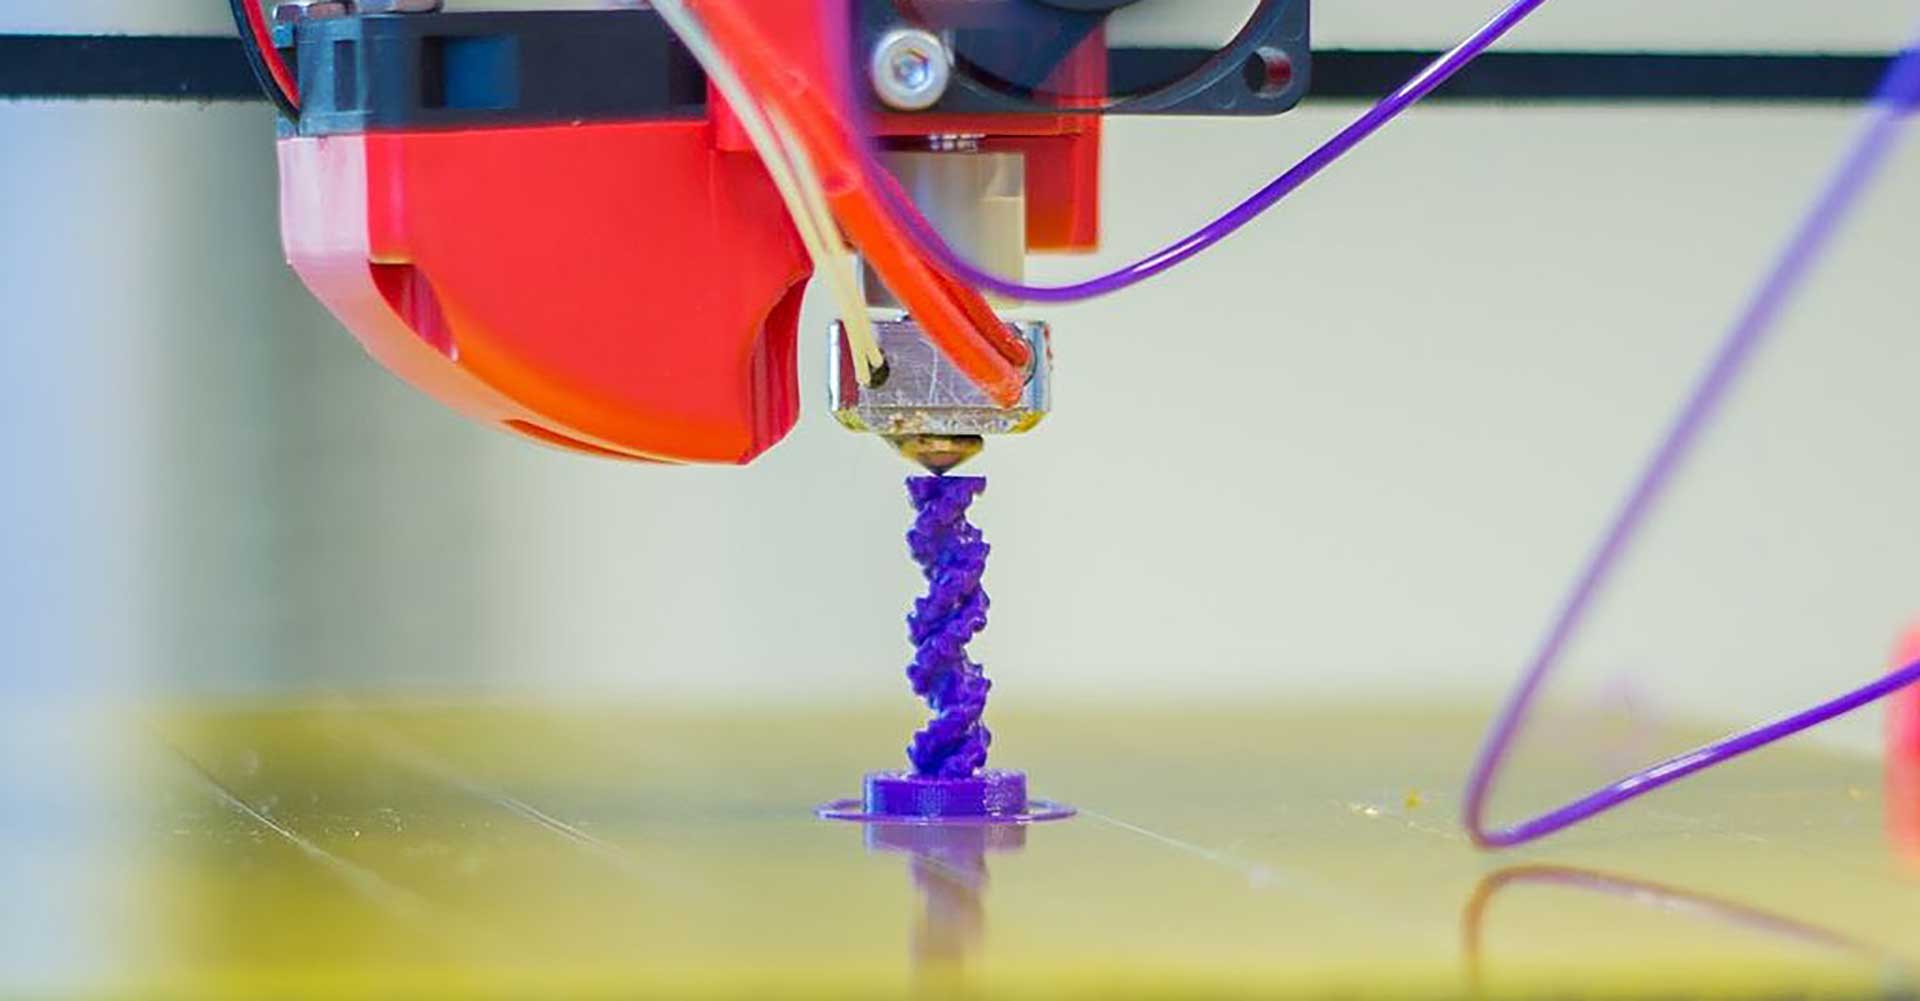 3D Printing additive manufacturing